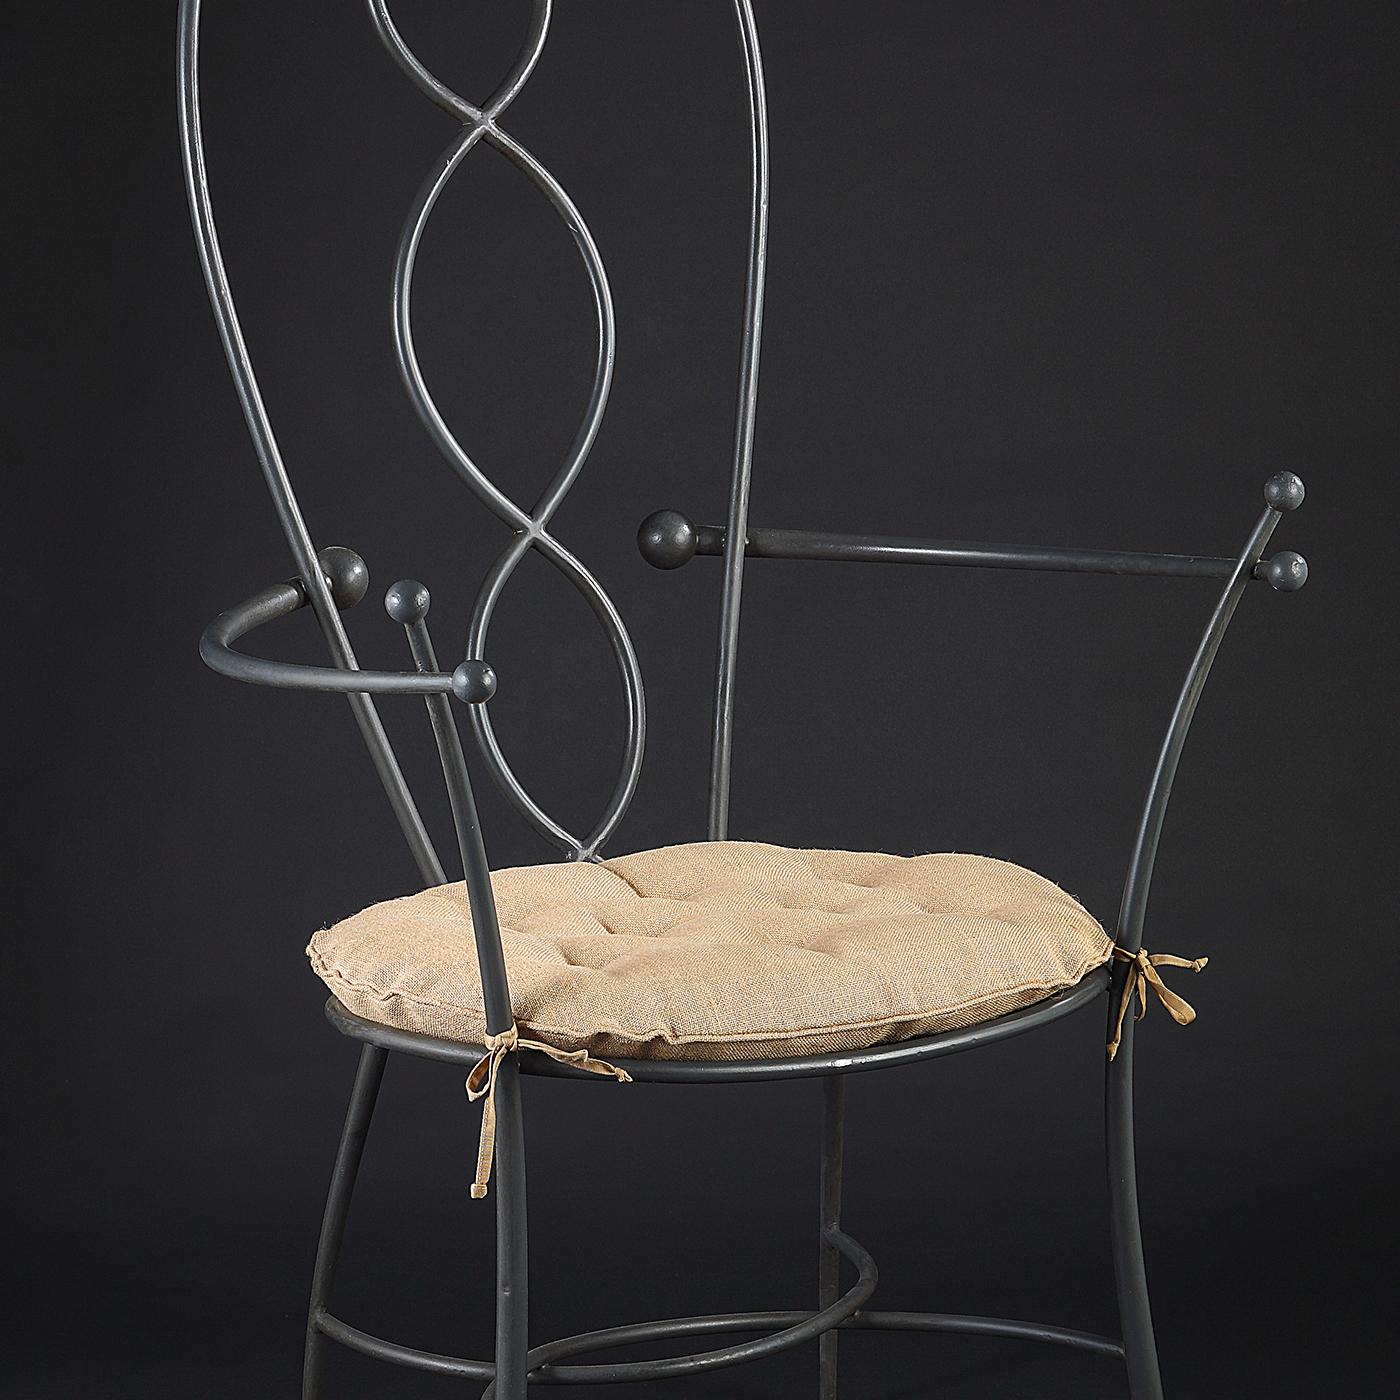 A series of curves that cross and intertwine is the dominant decorative pattern of this splendid chair that will add a romantic and retro-chic accent to any interior. The stainless steel structure comprises a round seat enveloped in open armrests